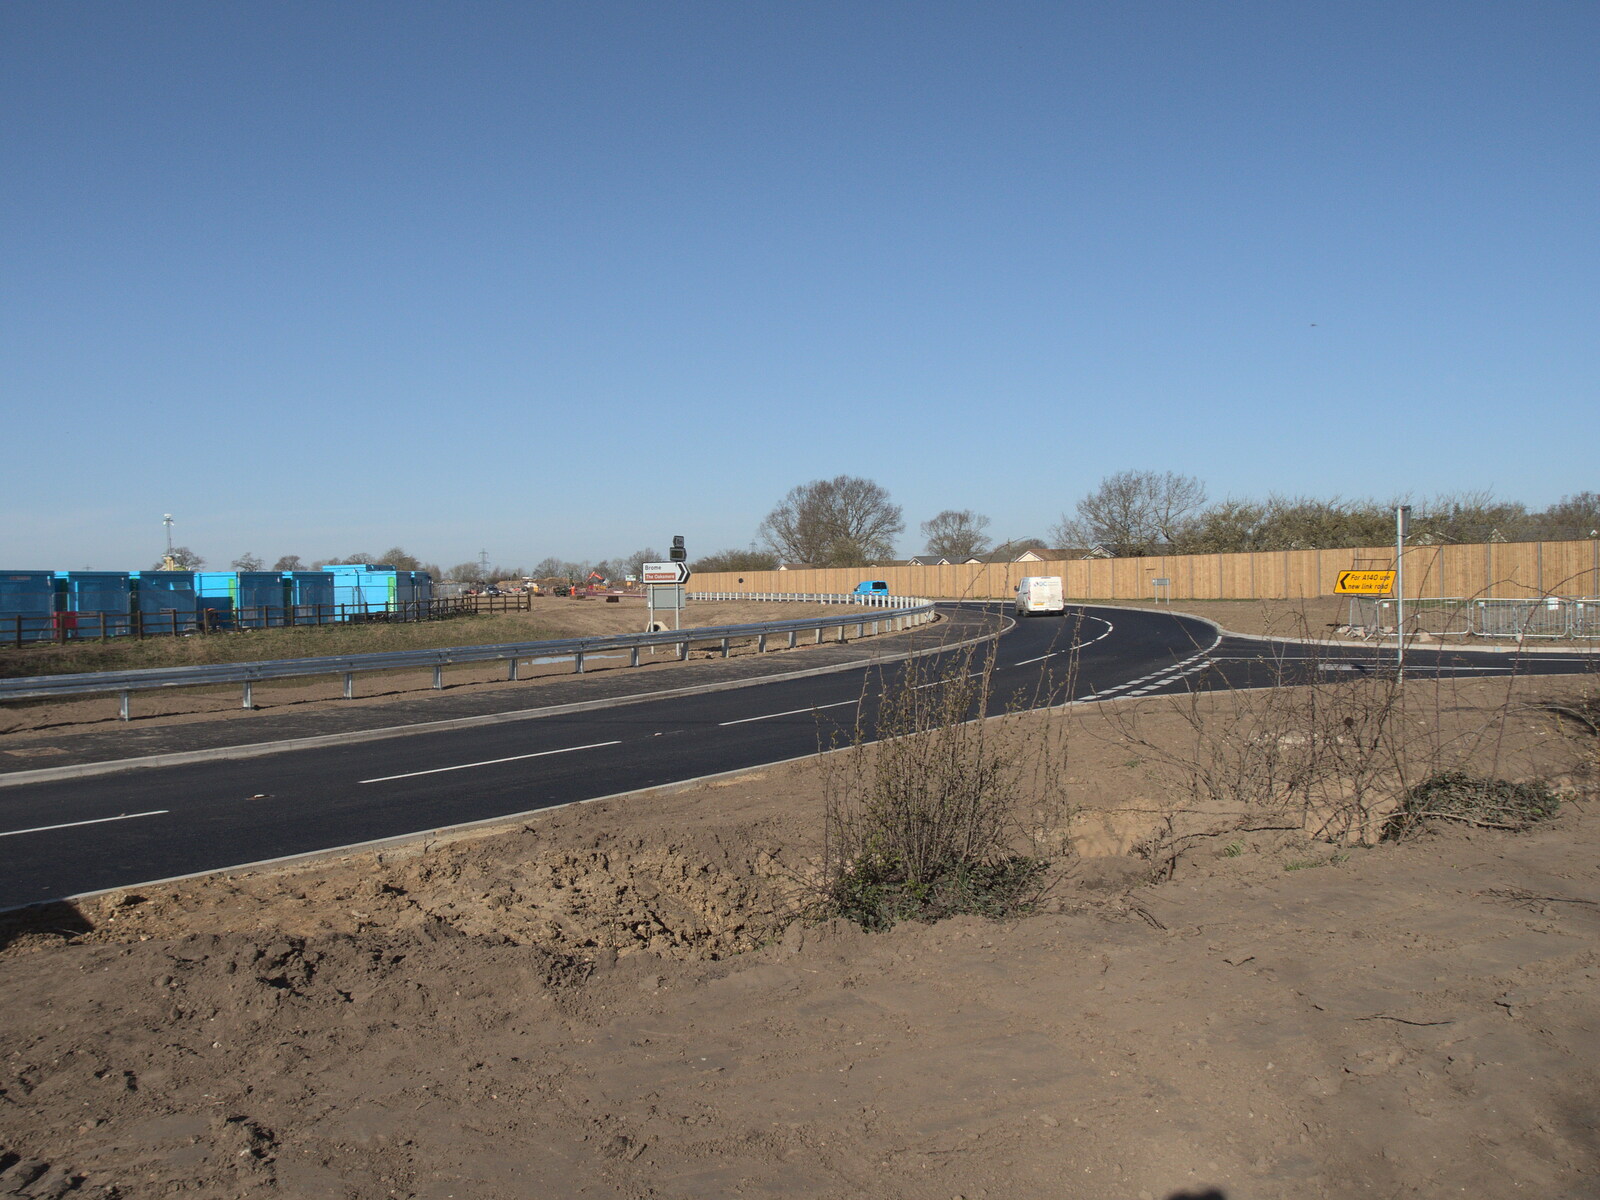 The new B1077 link road to the A140 from Roadworks and Harry's Trampoline, Brome, Suffolk - 6th April 2021